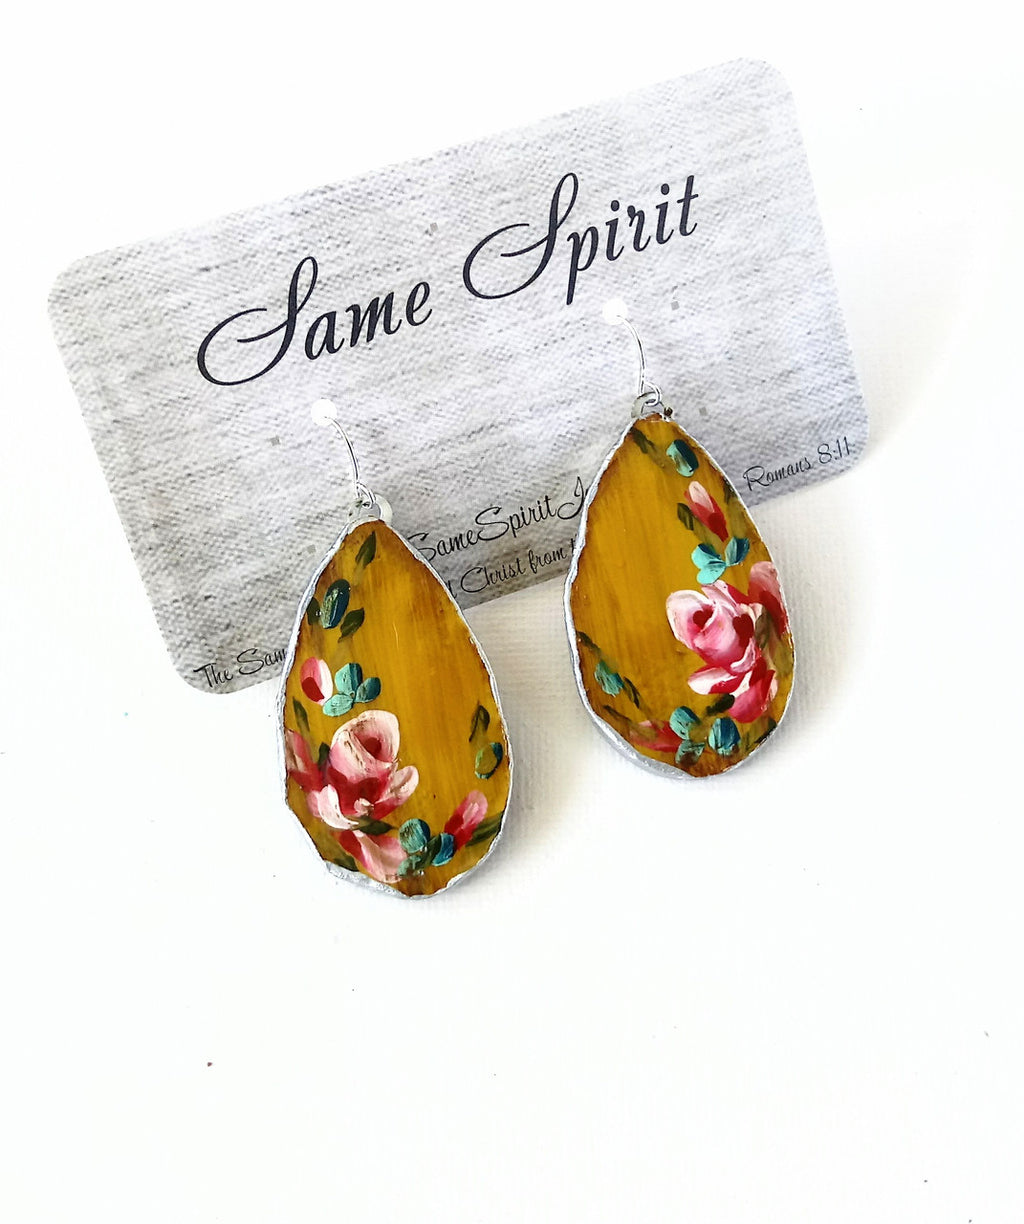 Same Spirit - EARRINGS - IN MY MANSION - BEATRICE COLLECTION